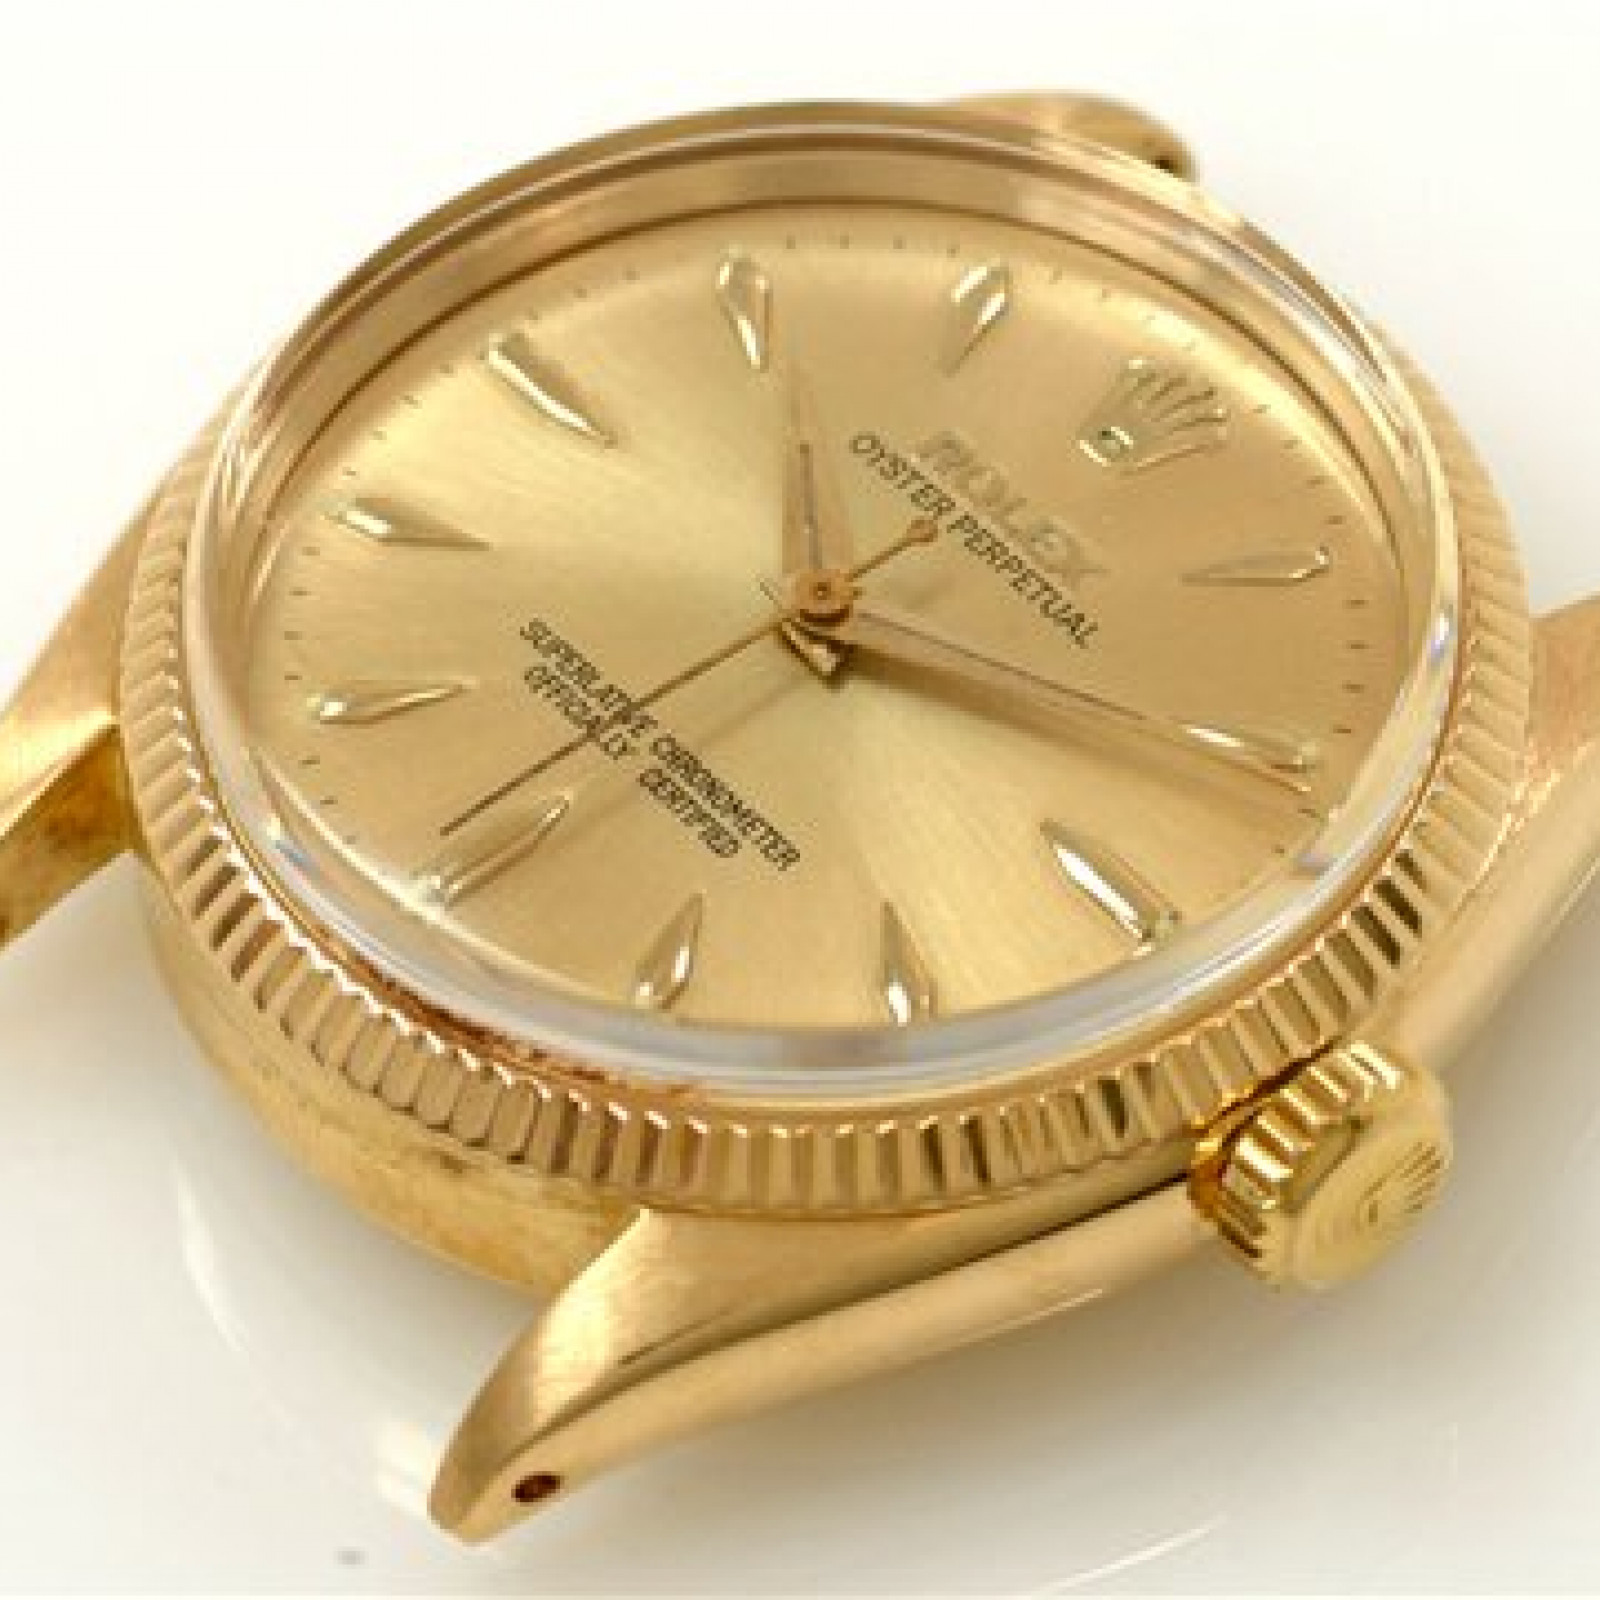 Vintage Rolex Oyster Perpetual 6567